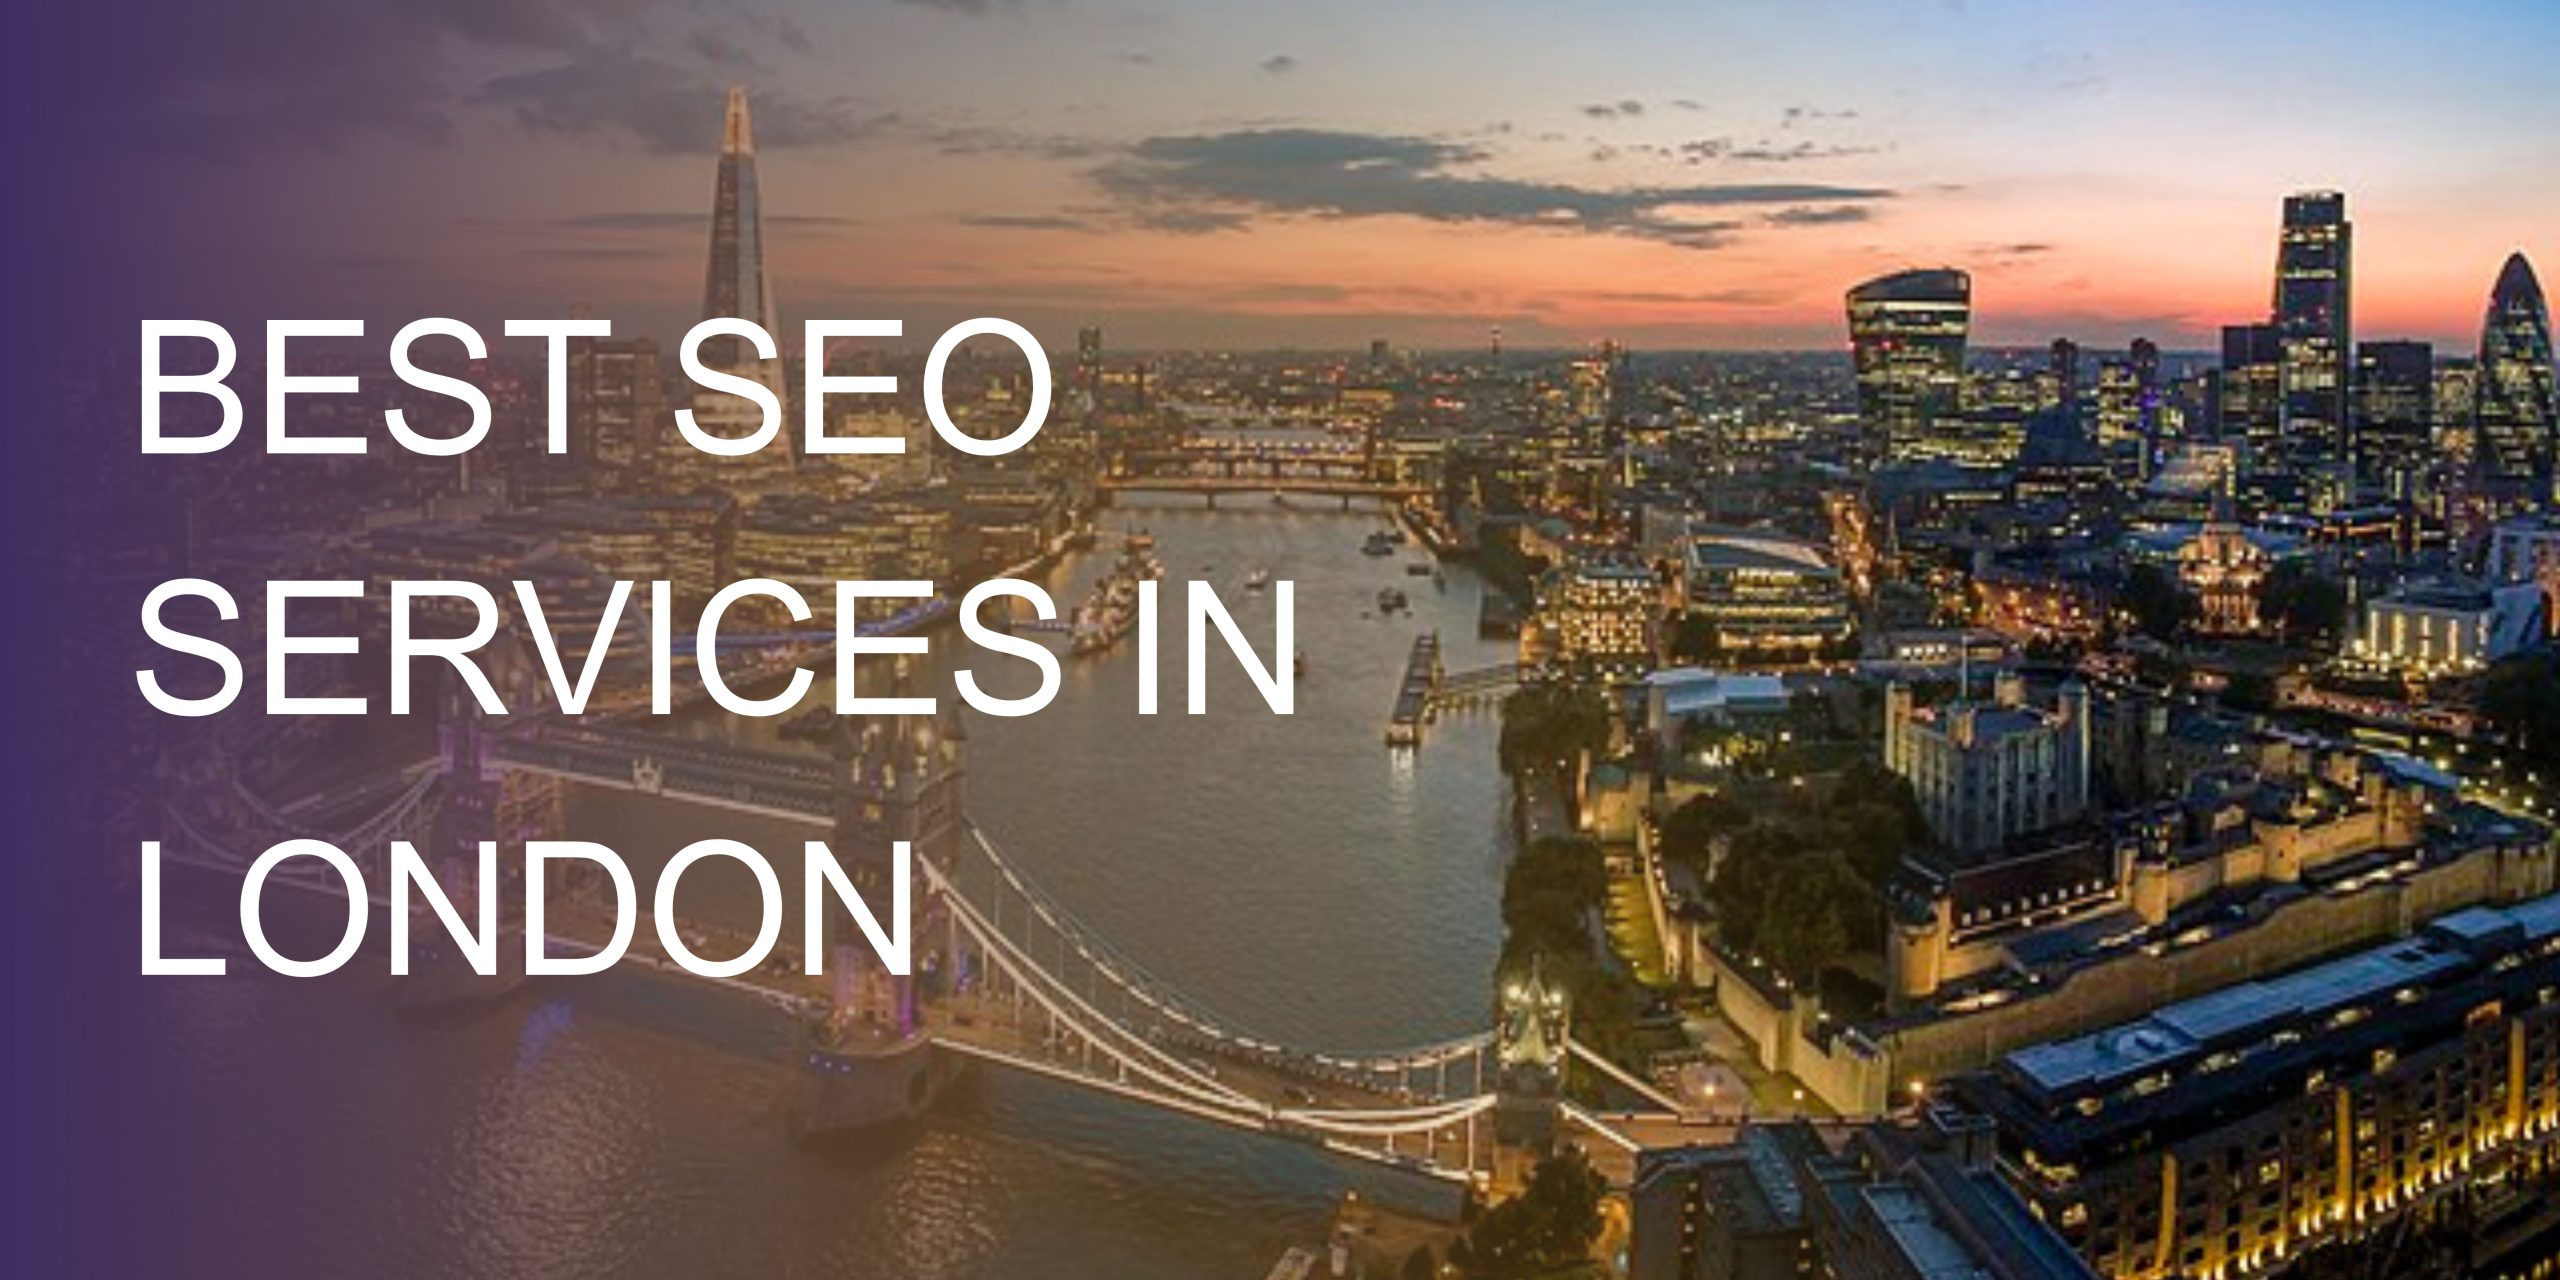 BEST SEO SERVICES IN LONDON